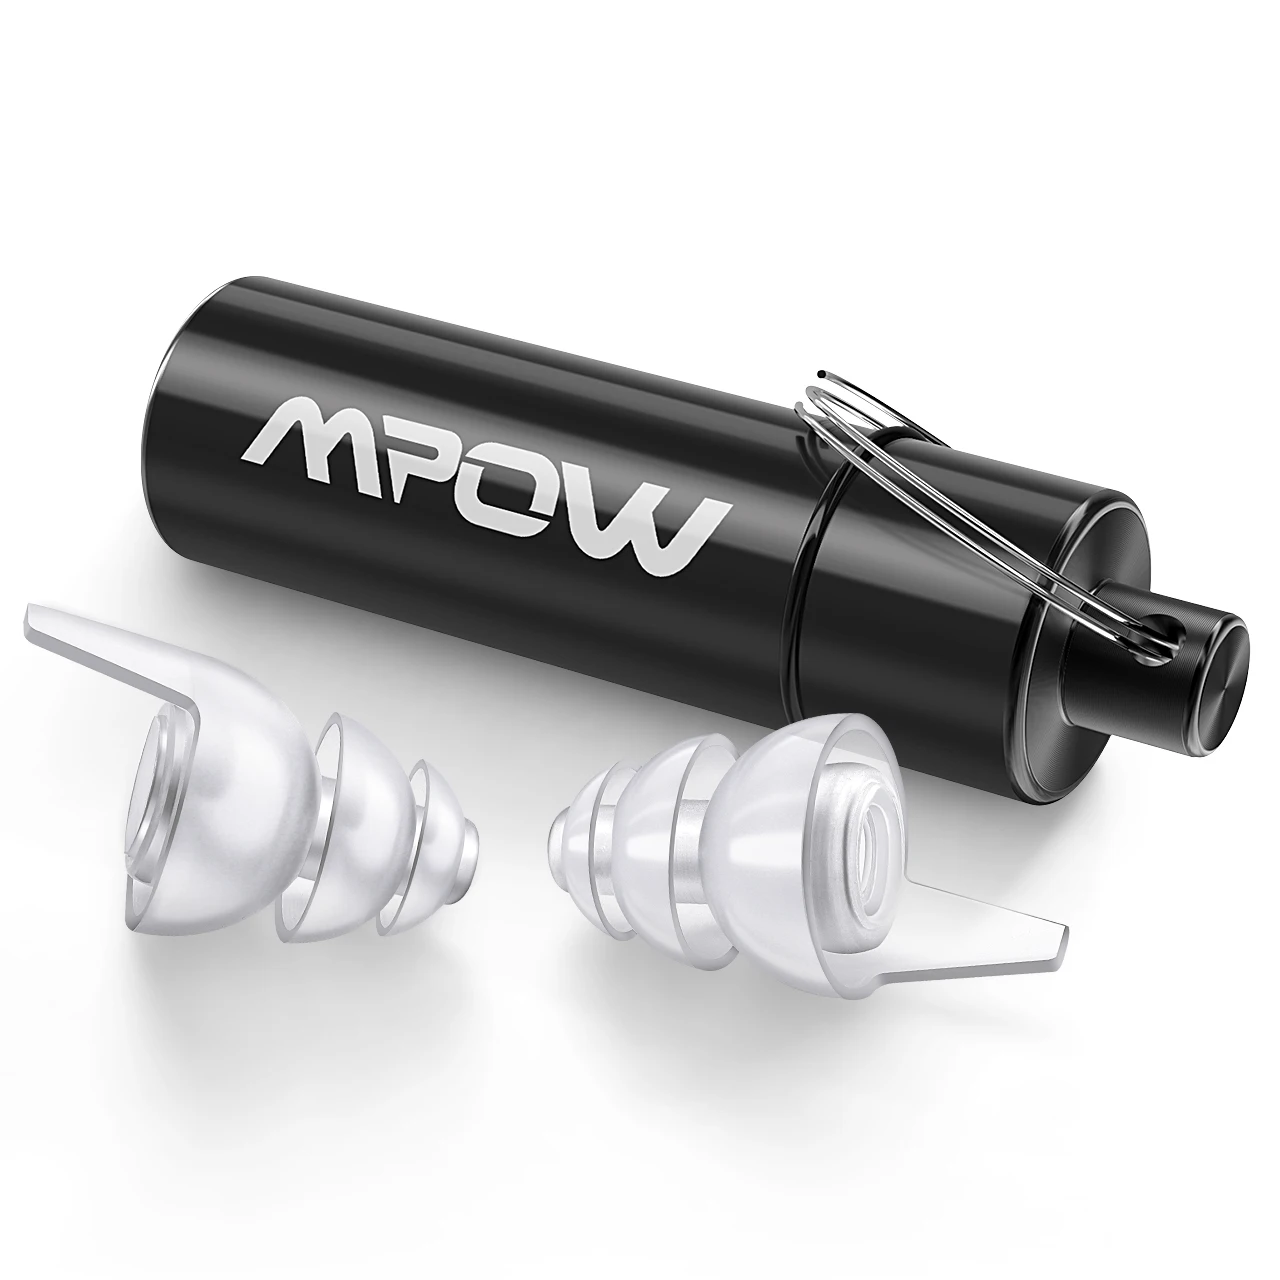 Mpow hp096 2pairs high fidelity earplugs snr 28db/ nrr 24db noise reduction music concert ear plugs with carry case for festival